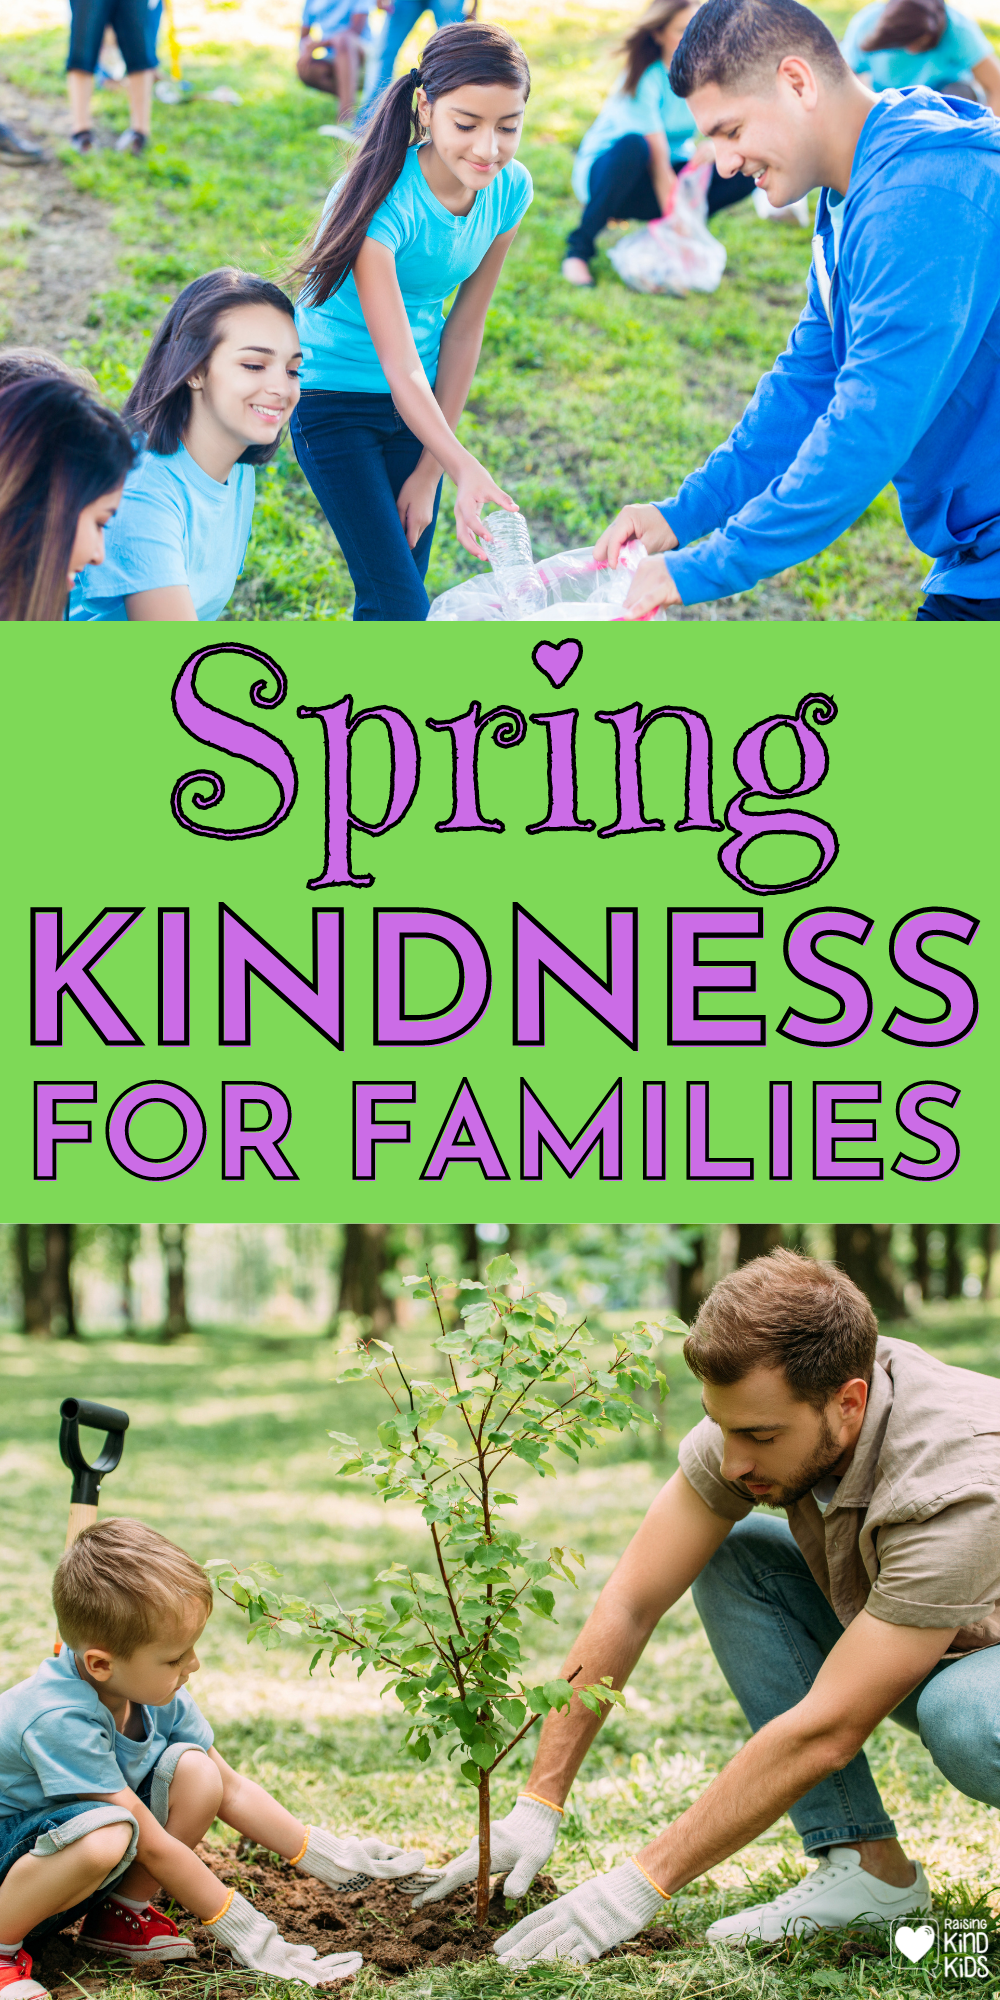 Use this spring kindness challenge for fun kindness activities for kids to do for others during March, April and May.